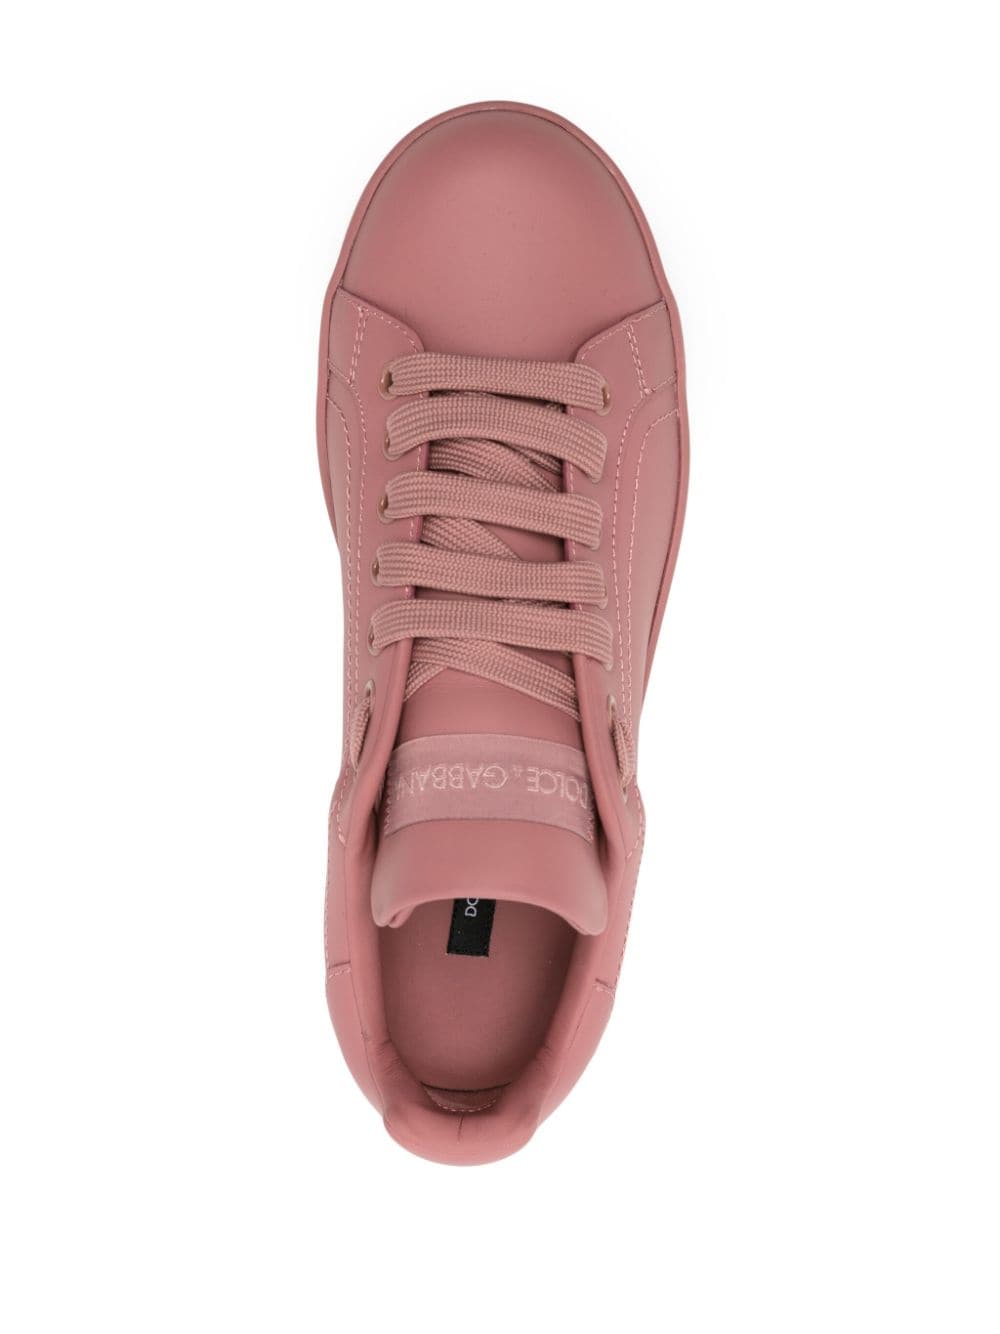 Embossed-logo leather sneakers<BR/><BR/><BR/>